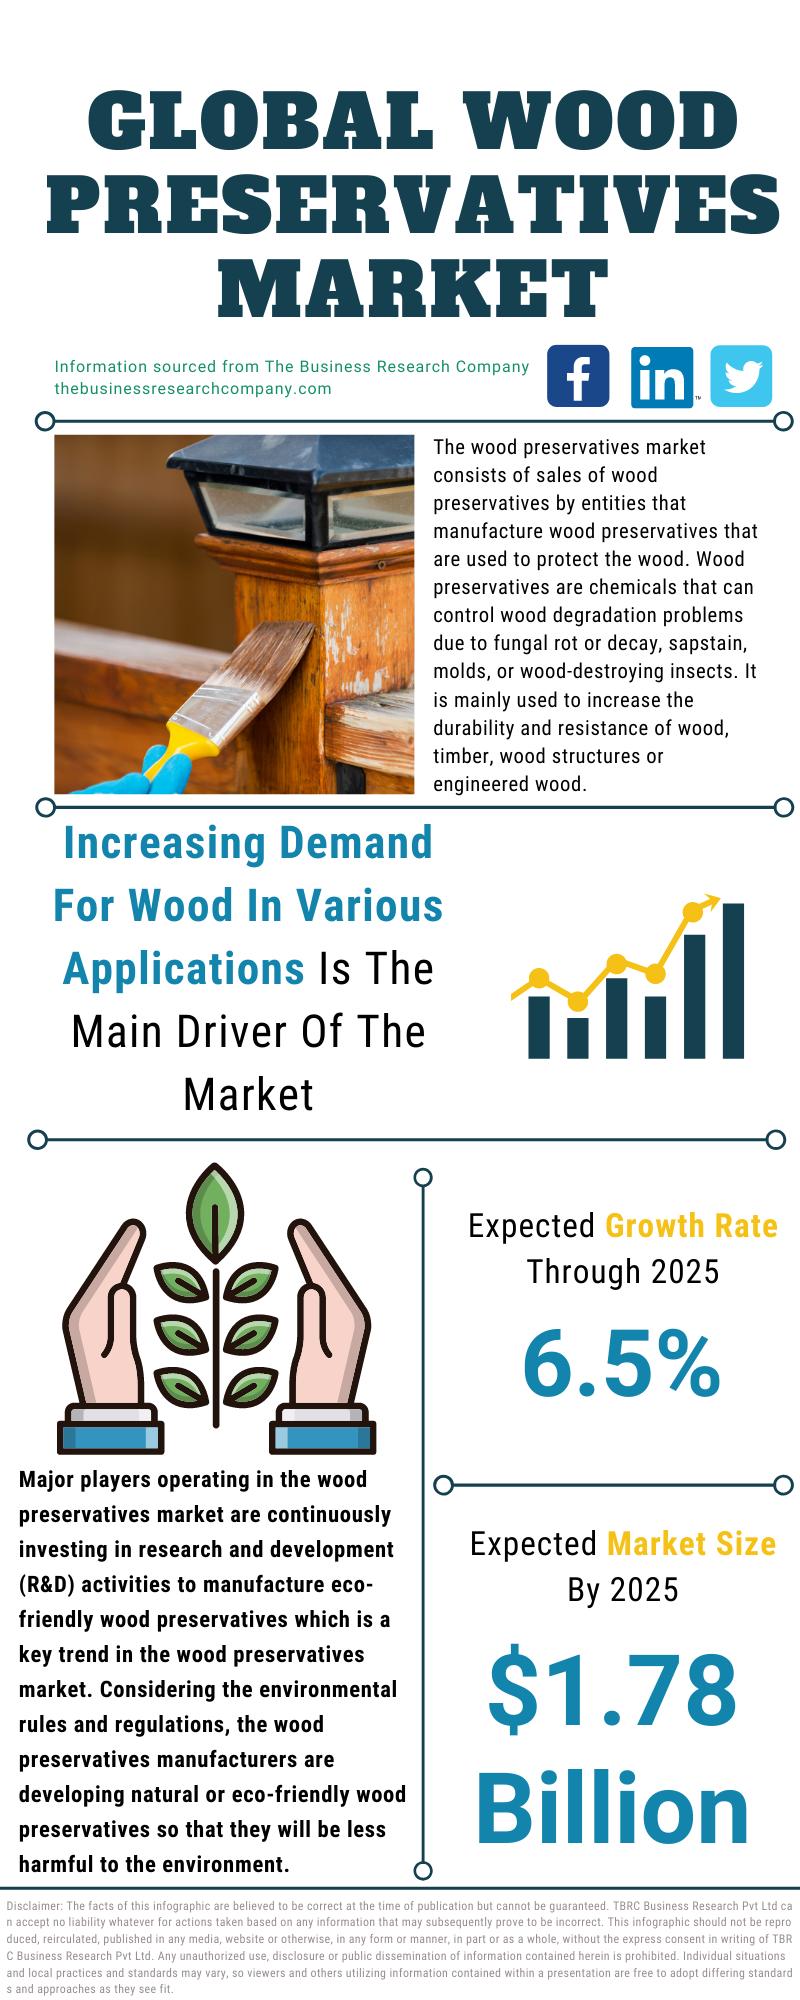 The Growing Trend of Environmentally Friendly Wood